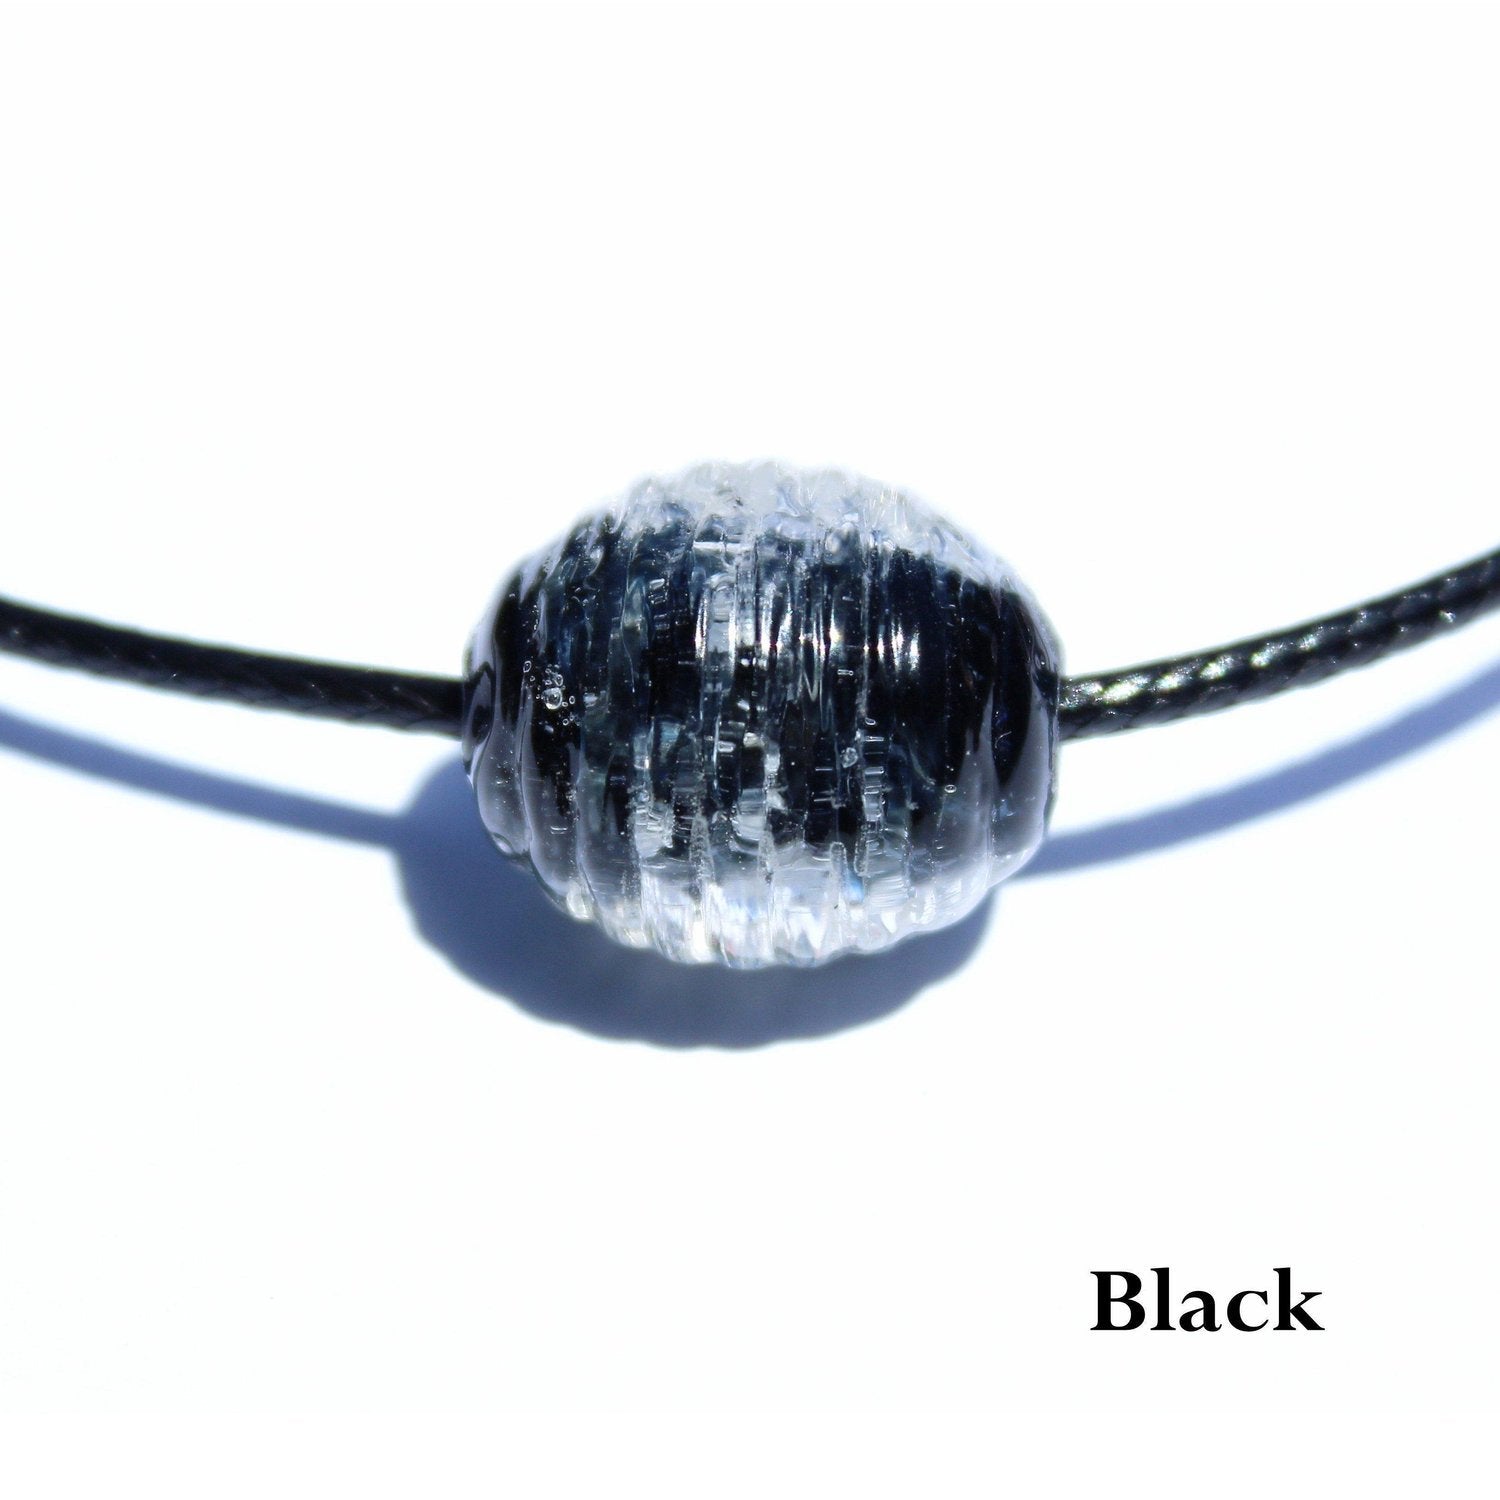 Eternity Beads - Glass Cremation Beads